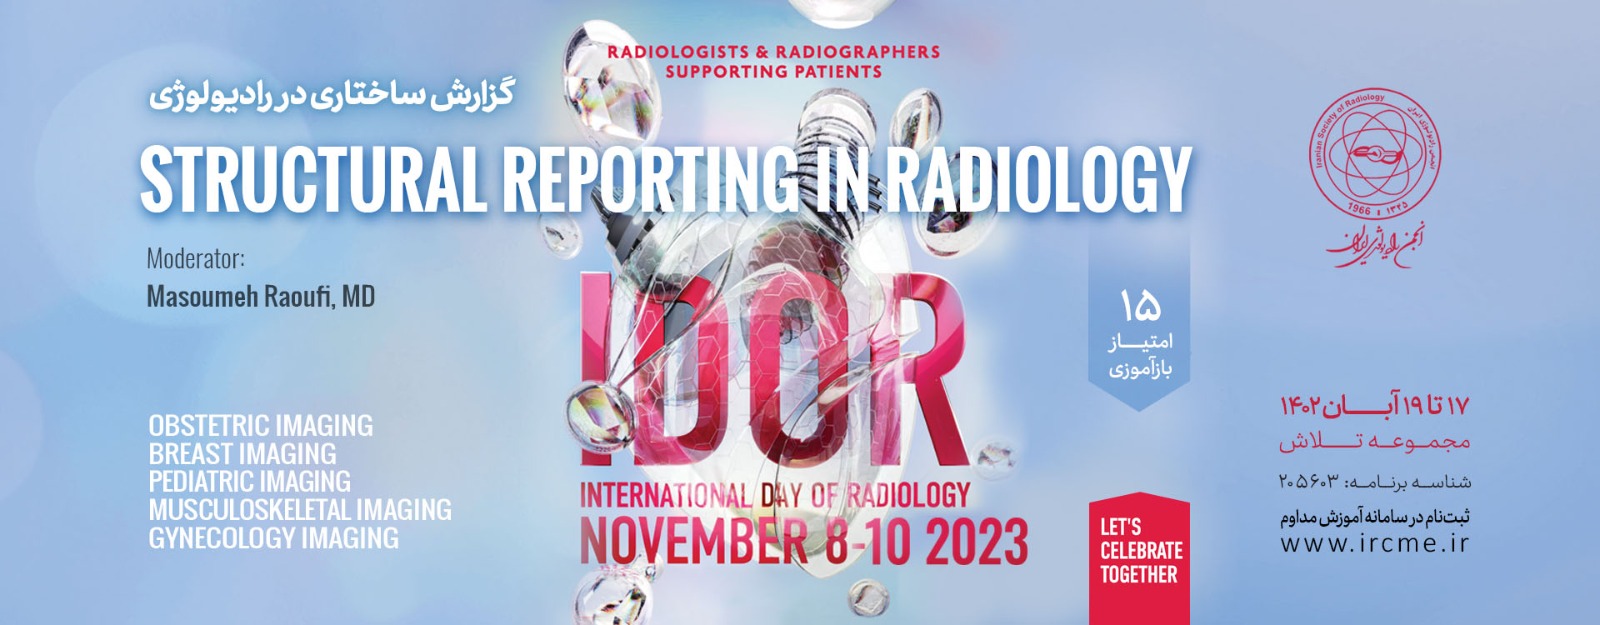 Structural Reporting In Radiology